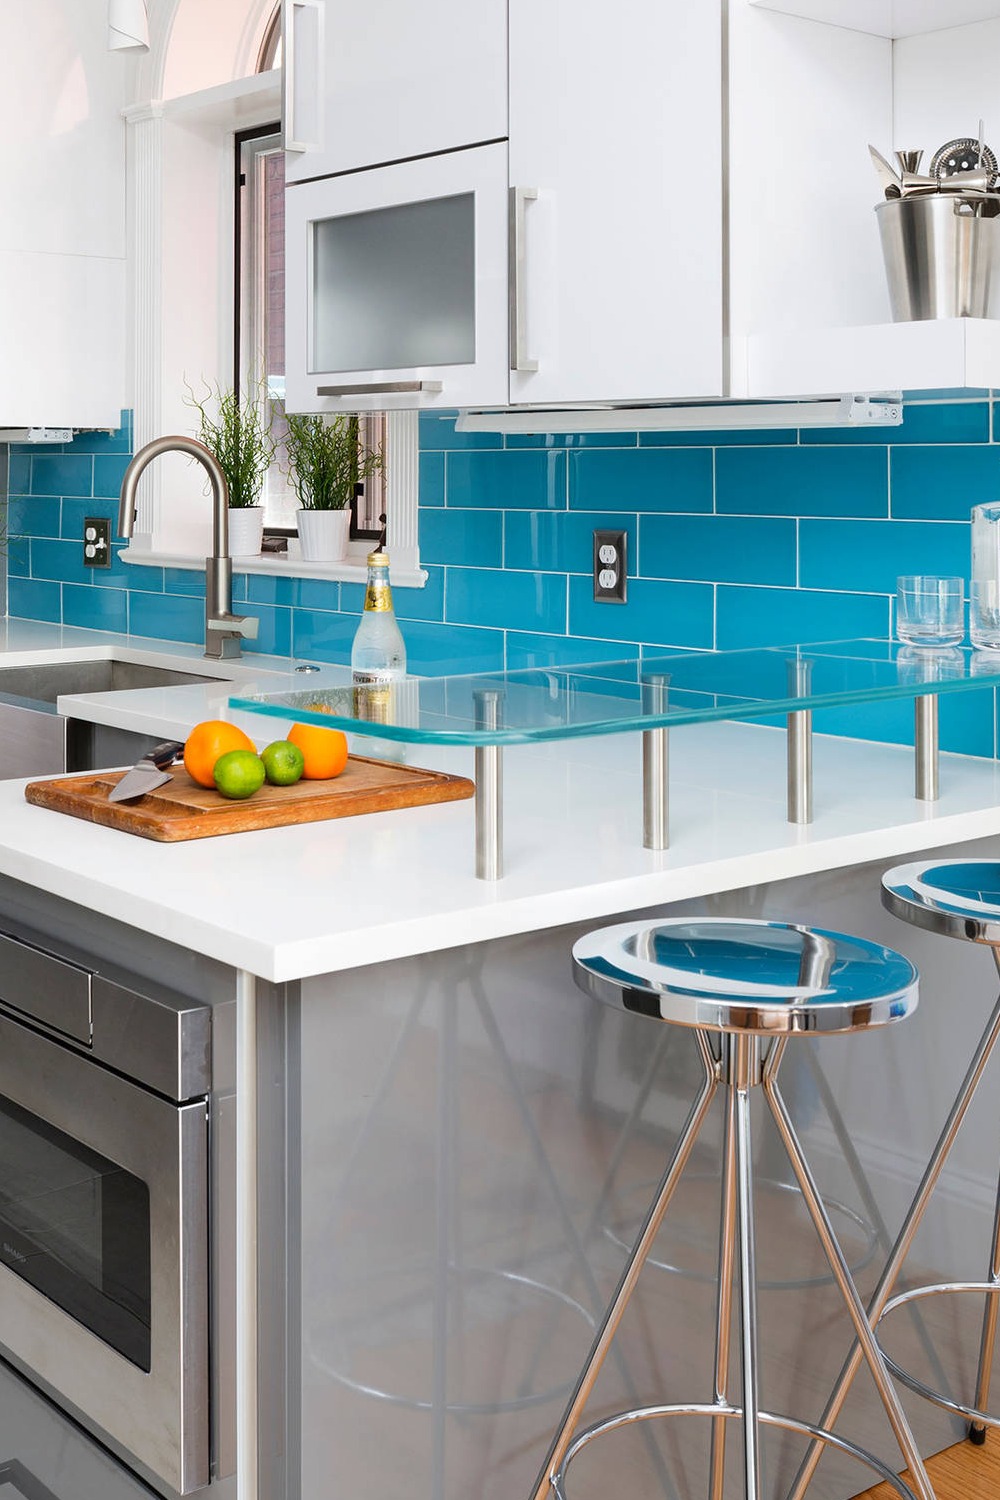 Blue Tiles With Gray Cabinets White Upper Cabinets Farmhouse Sink Subway Tile Stove Wood Kitchen Island